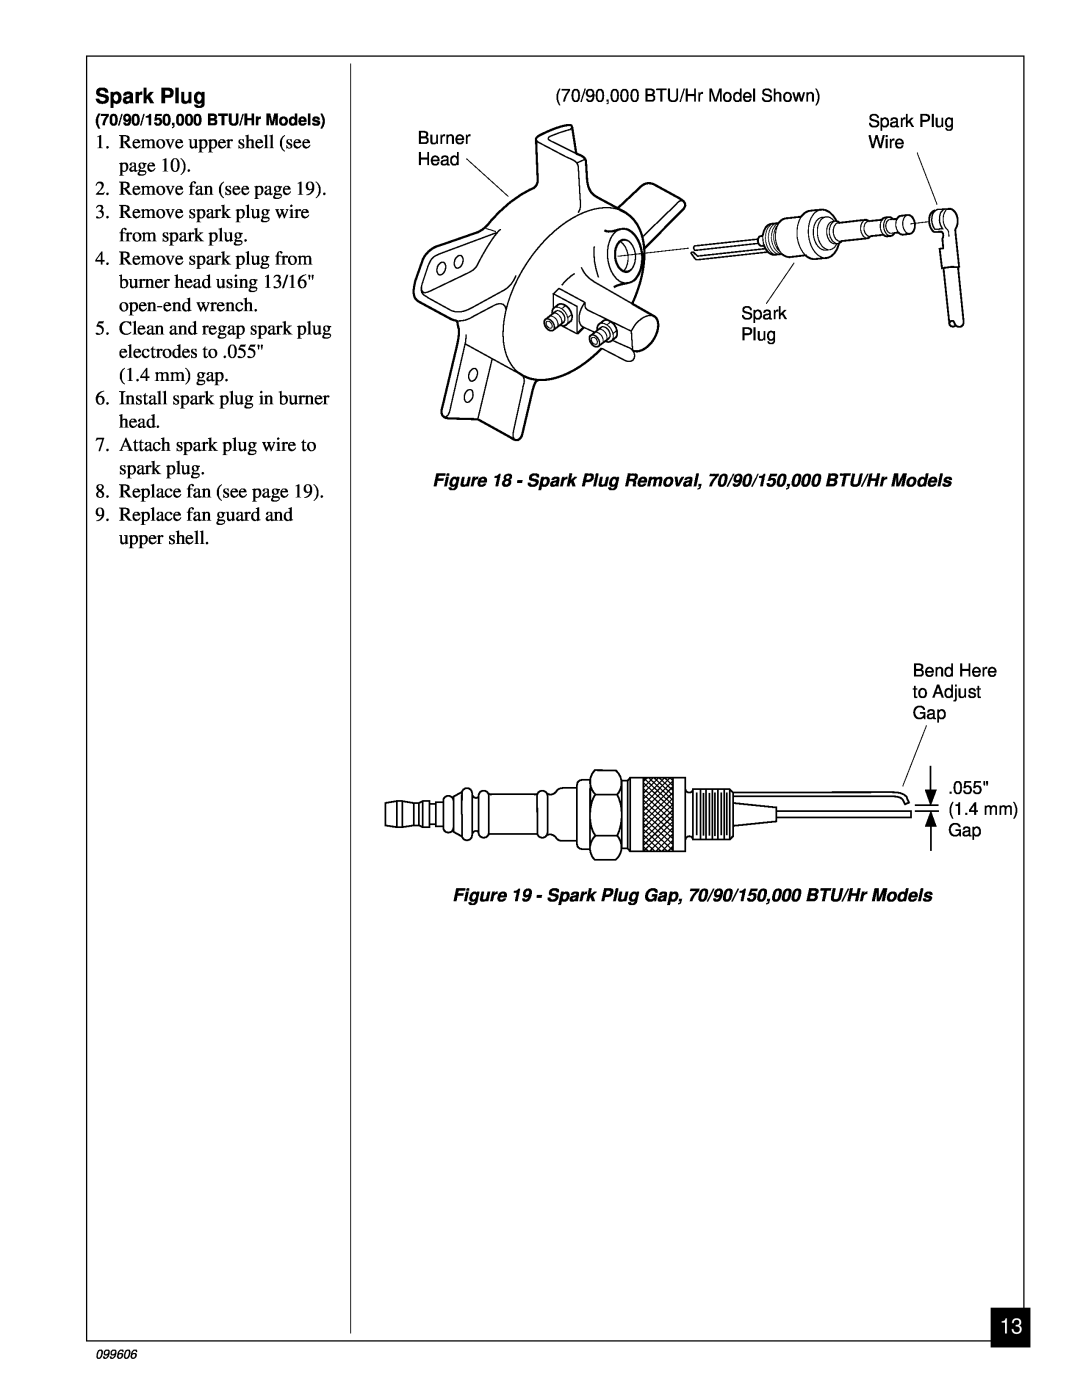 Desa 30, 90, 70 owner manual Spark Plug, Remove upper shell see page 